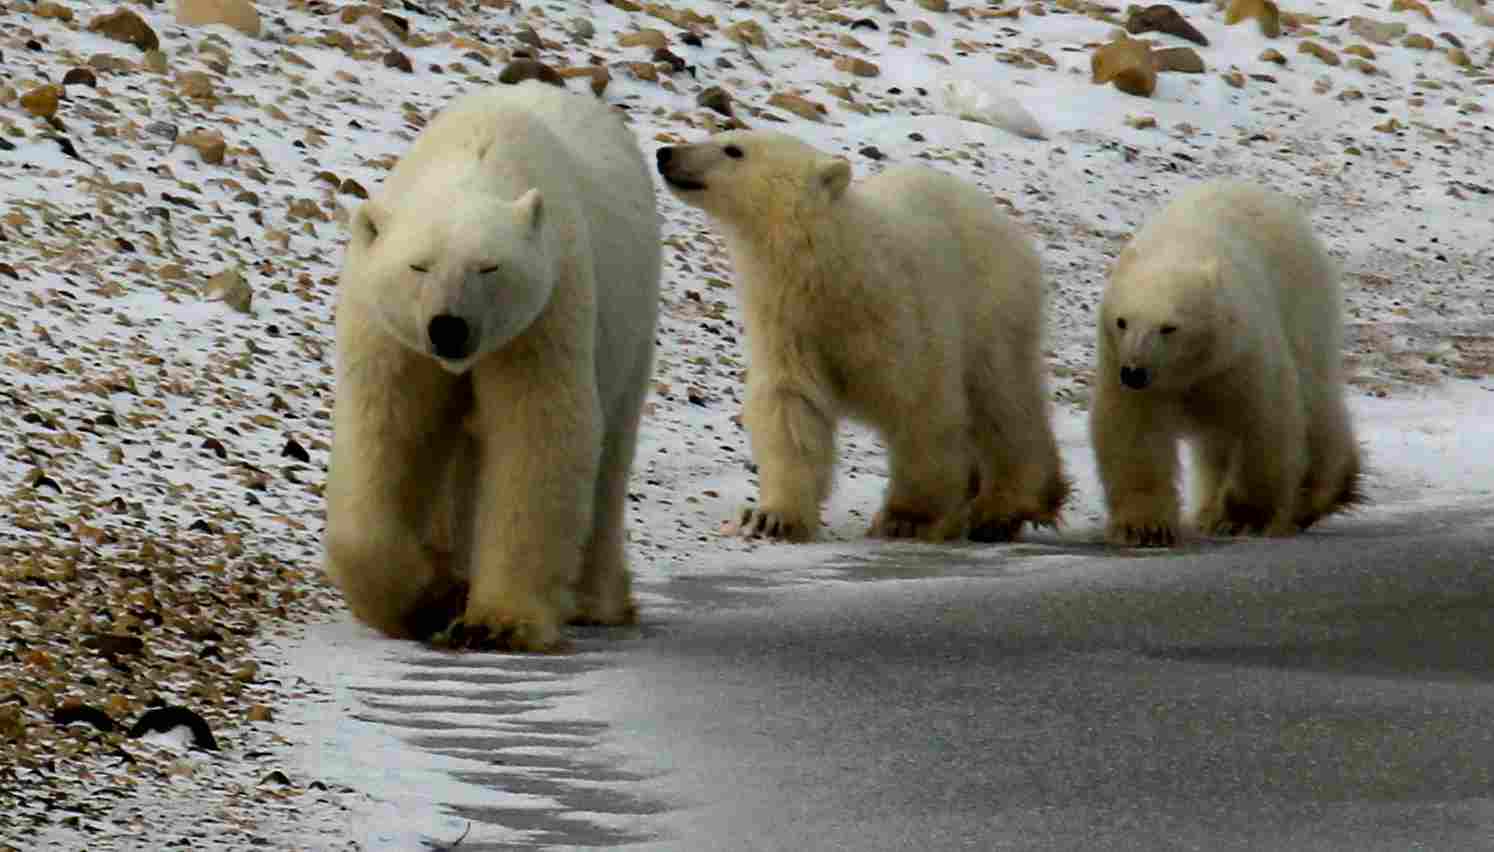 Polar Bear Vs Grizzly Bear: Habitats of Polar and Grizzly Bears Hardly Converge or Overlap (Credit: Emma 2011 .CC BY 2.0.)